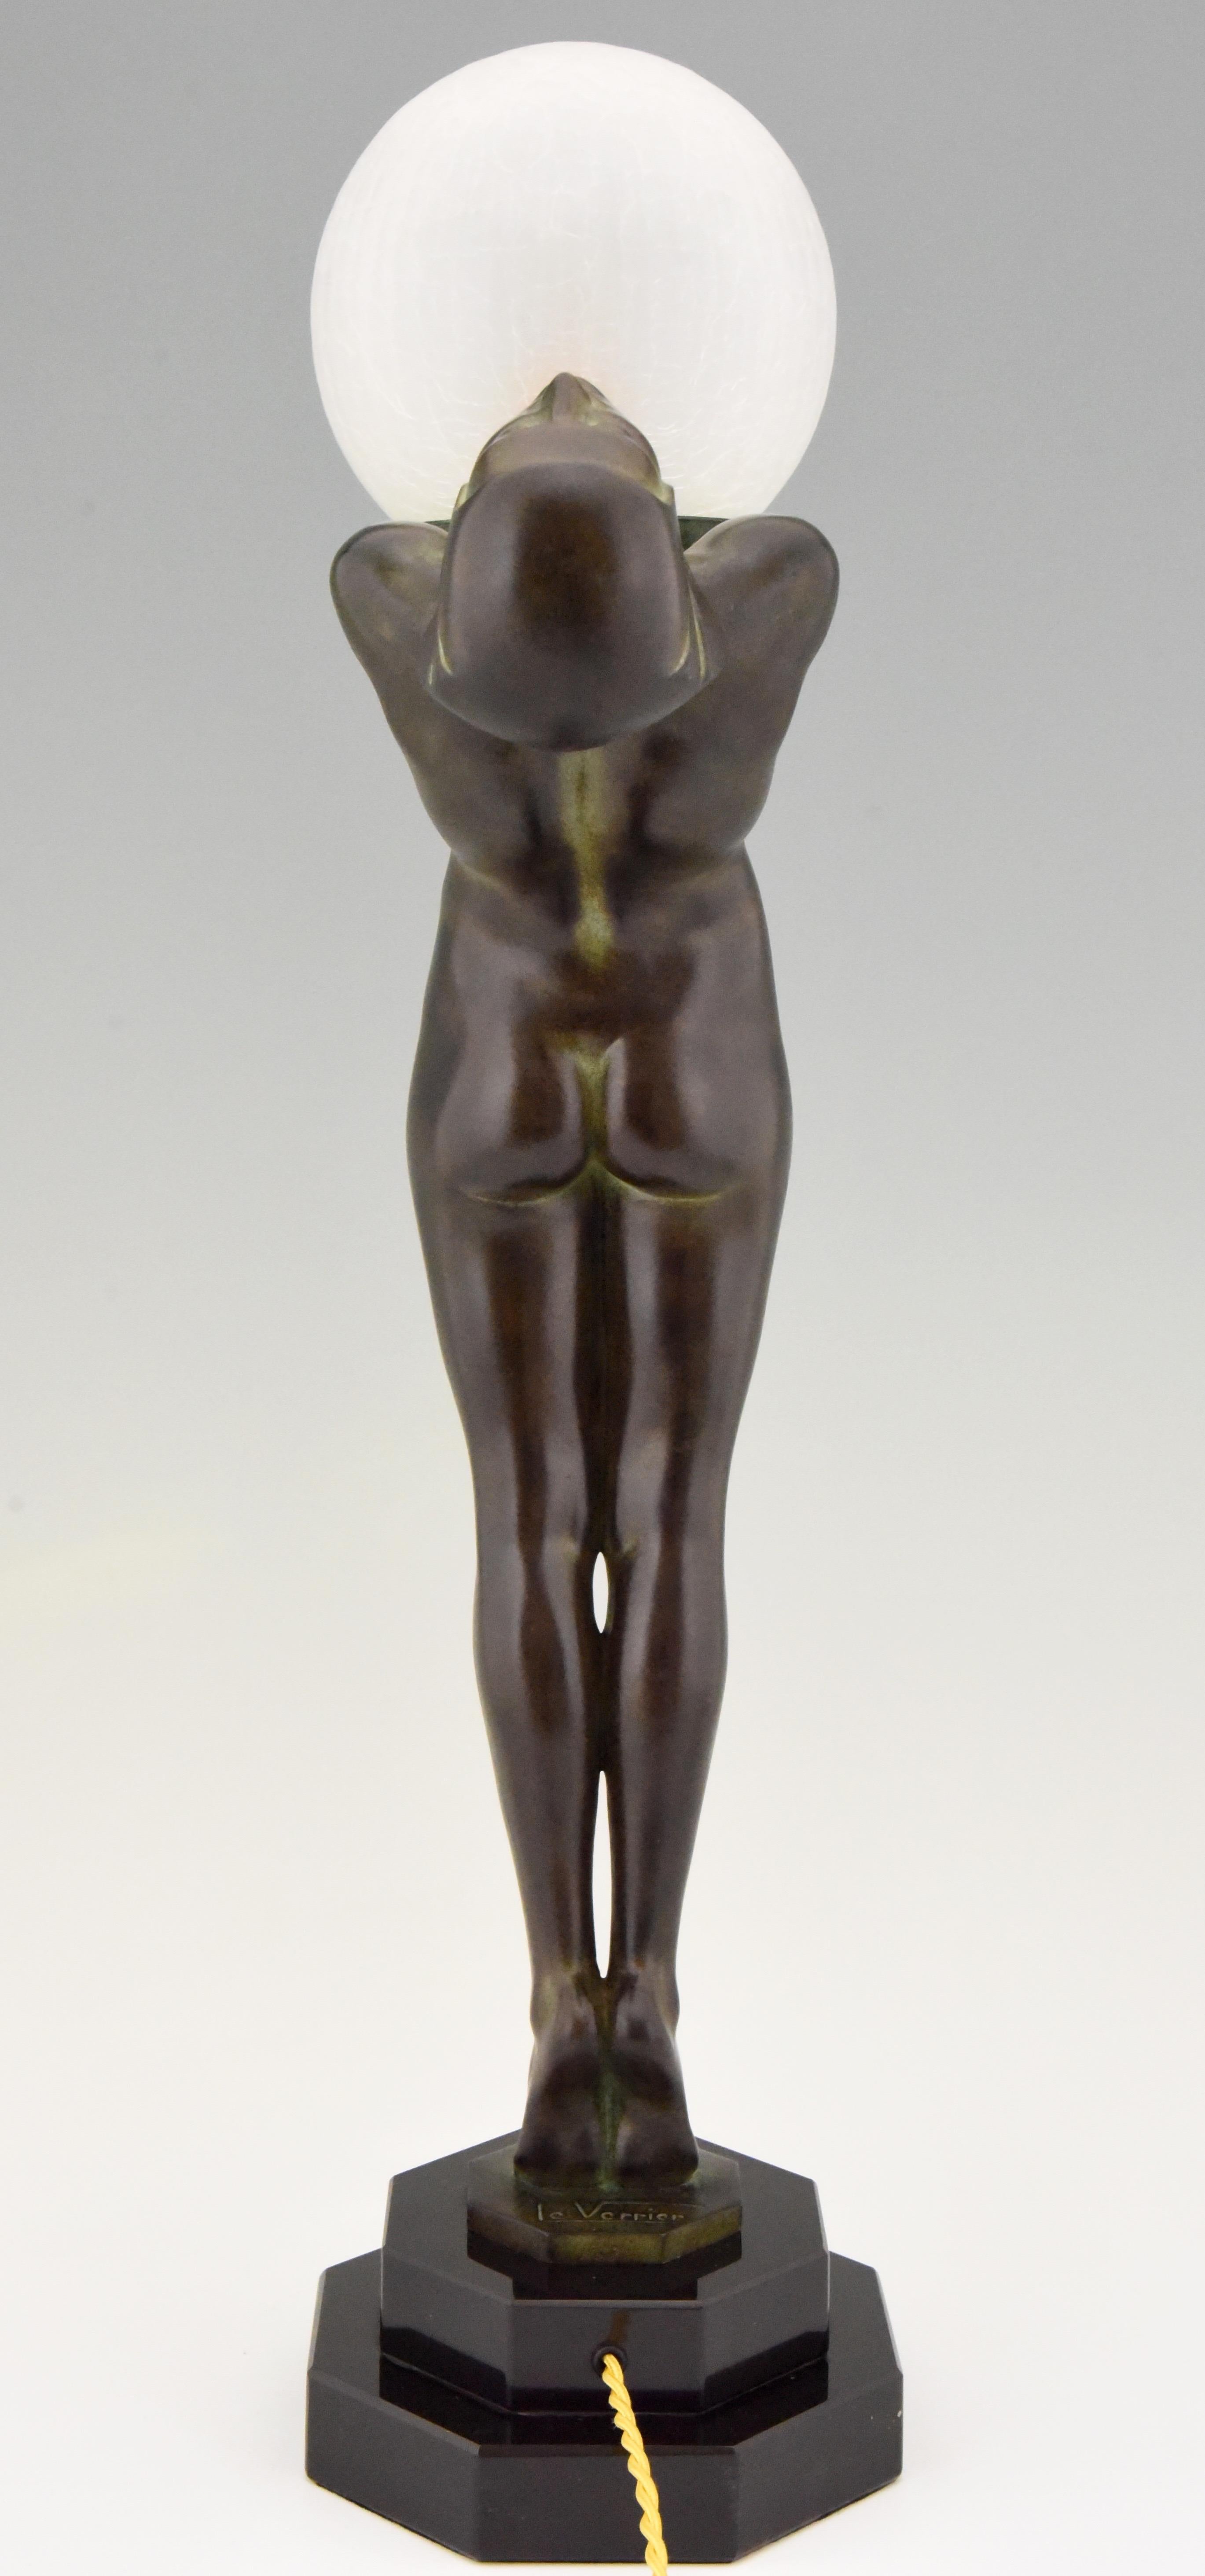 Hand-Crafted Art Deco Style Lamp Clarté Standing Nude Sculpture Max Le Verrier For Sale